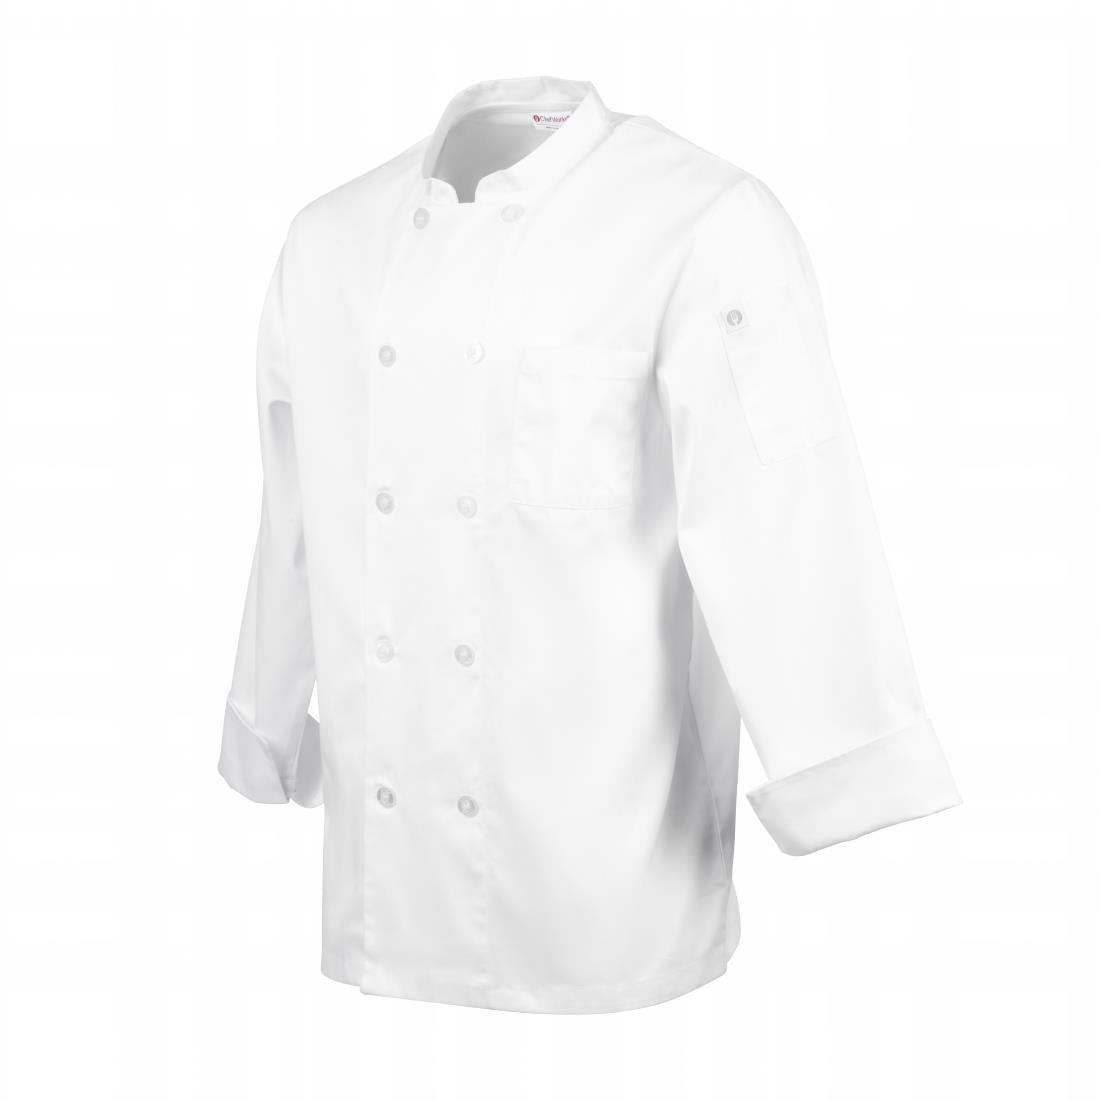 A371-8XL Chef Works Le Mans Chefs Jacket White 8XL JD Catering Equipment Solutions Ltd